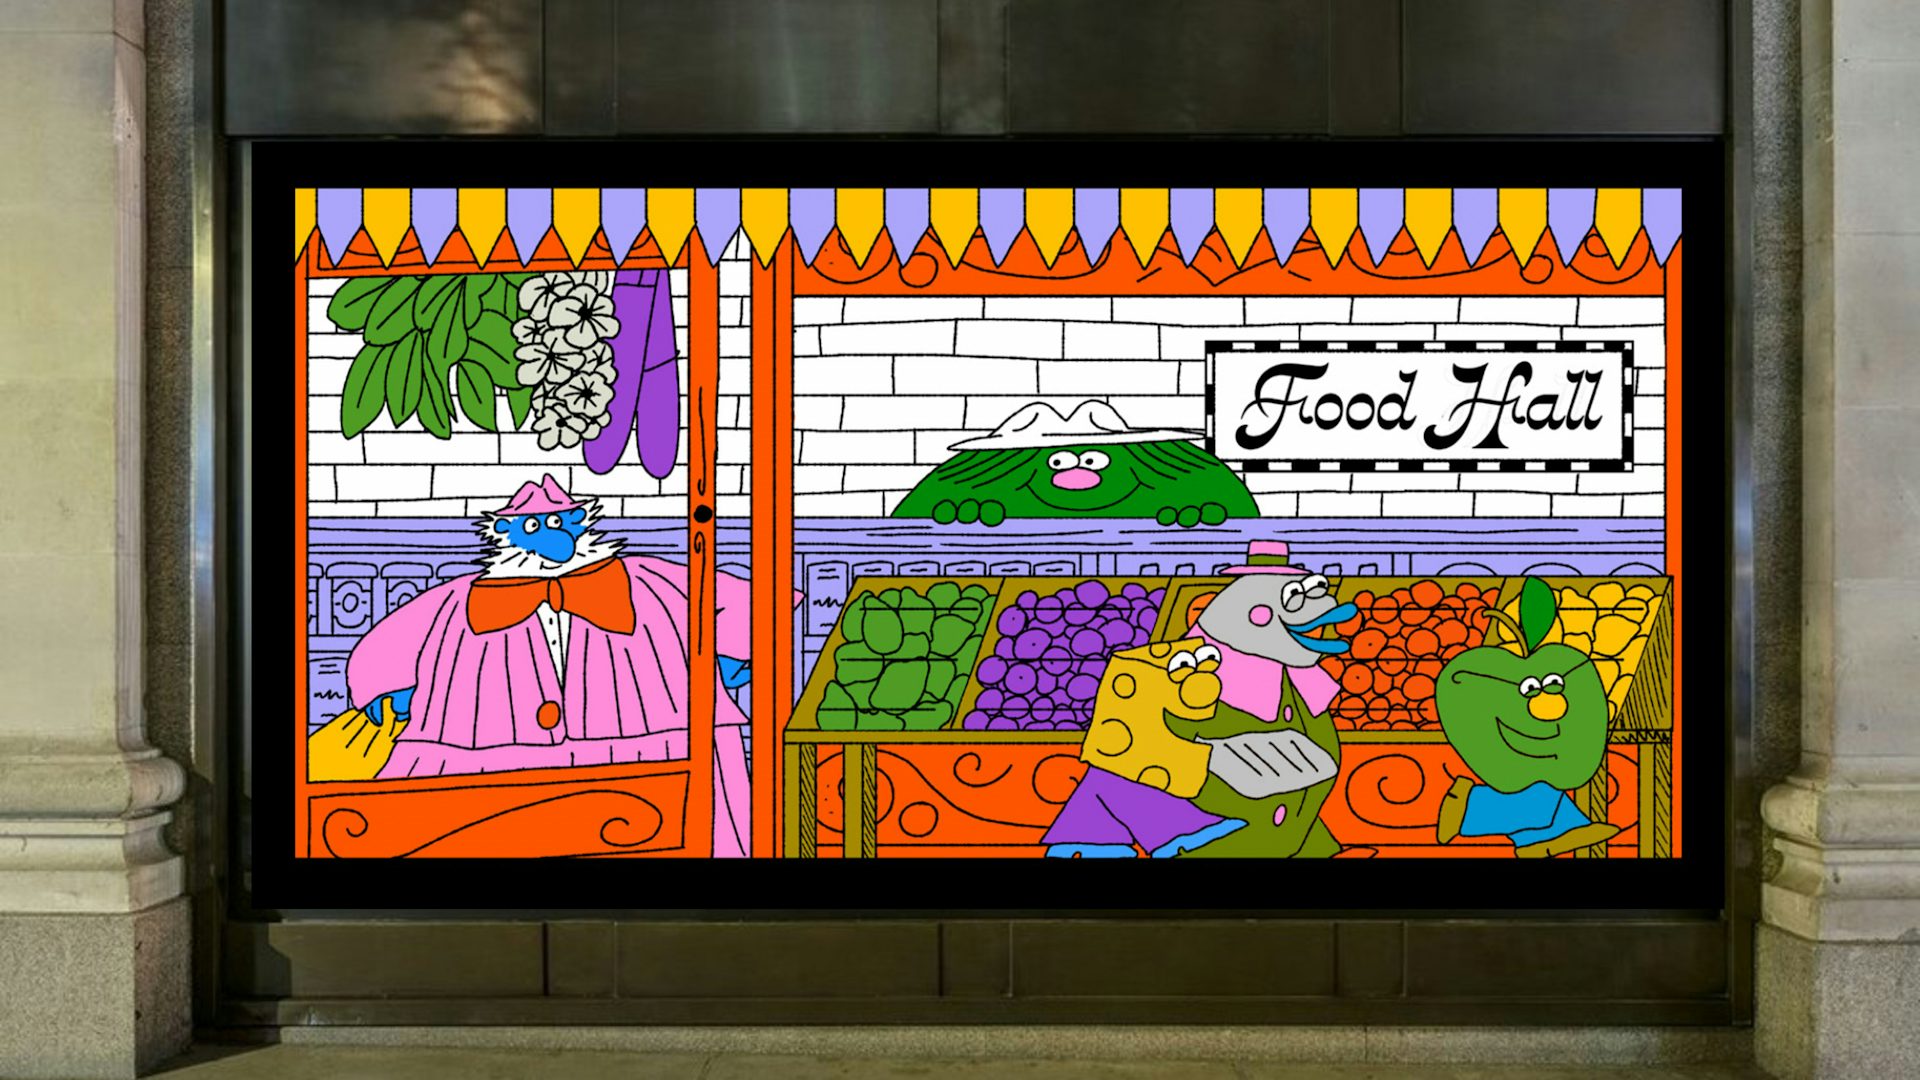 Selfridges has launched a new season of illustrated windows